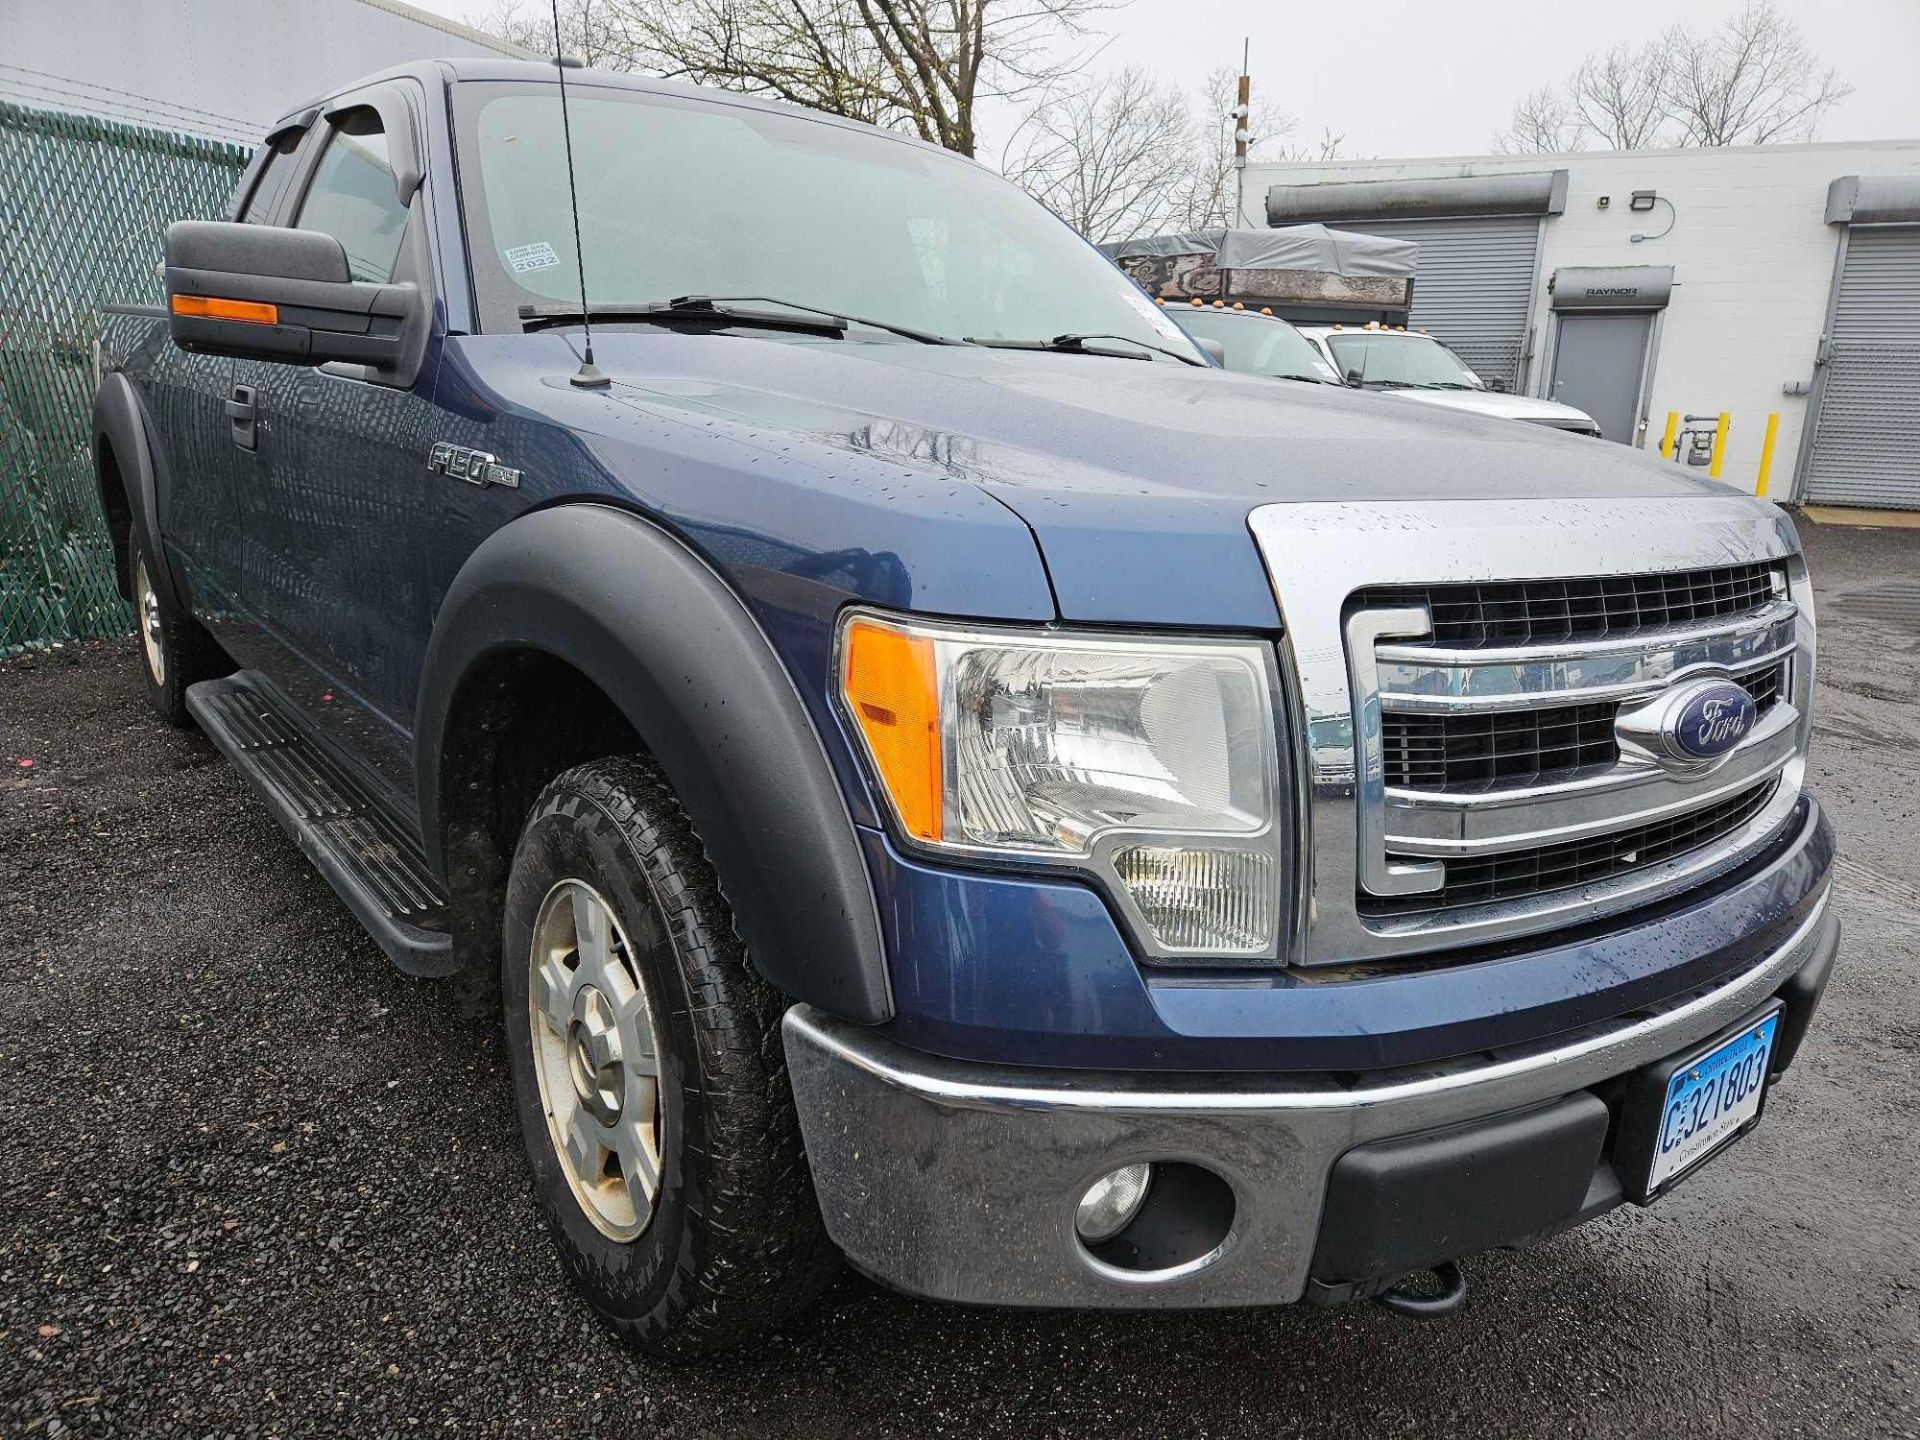 2014 Ford F150 Extended Cab Pickup - Image 2 of 9